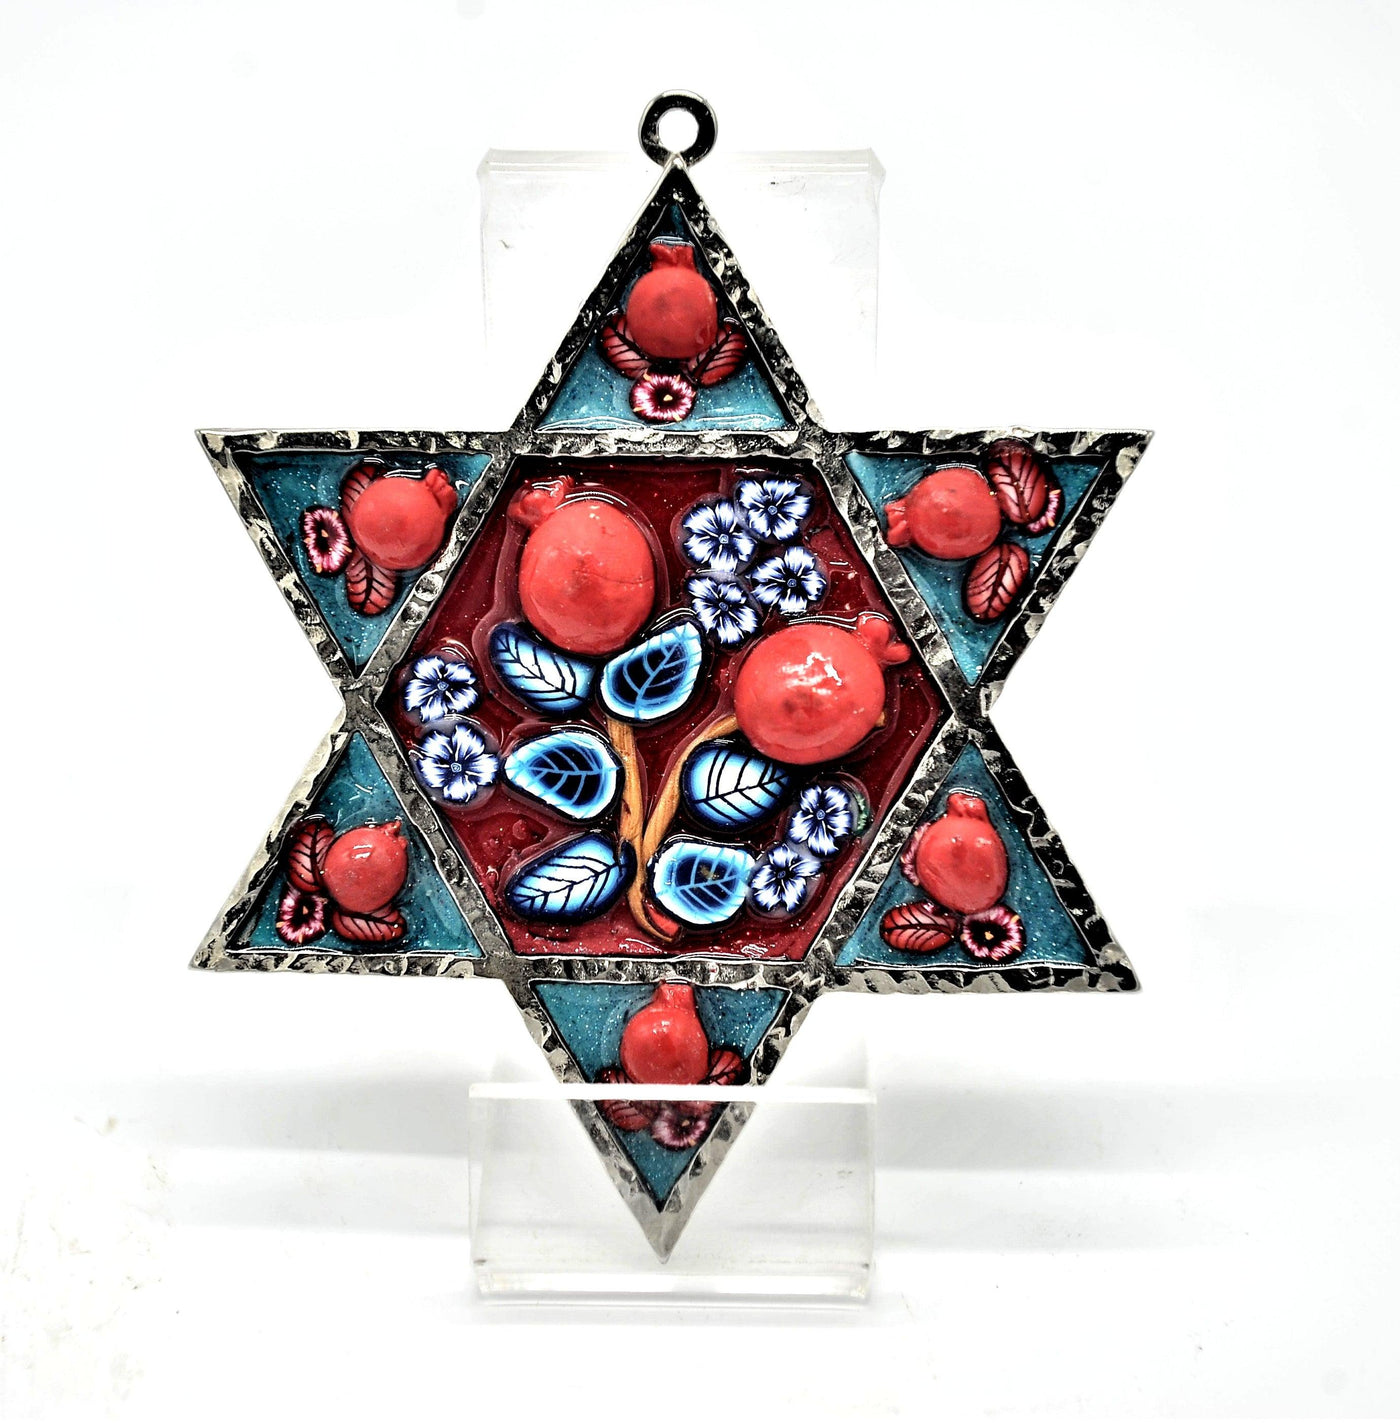 Star of David Fimo Blessings figure for Home Blessing Wall Hanging large #18 - Spring Nahal